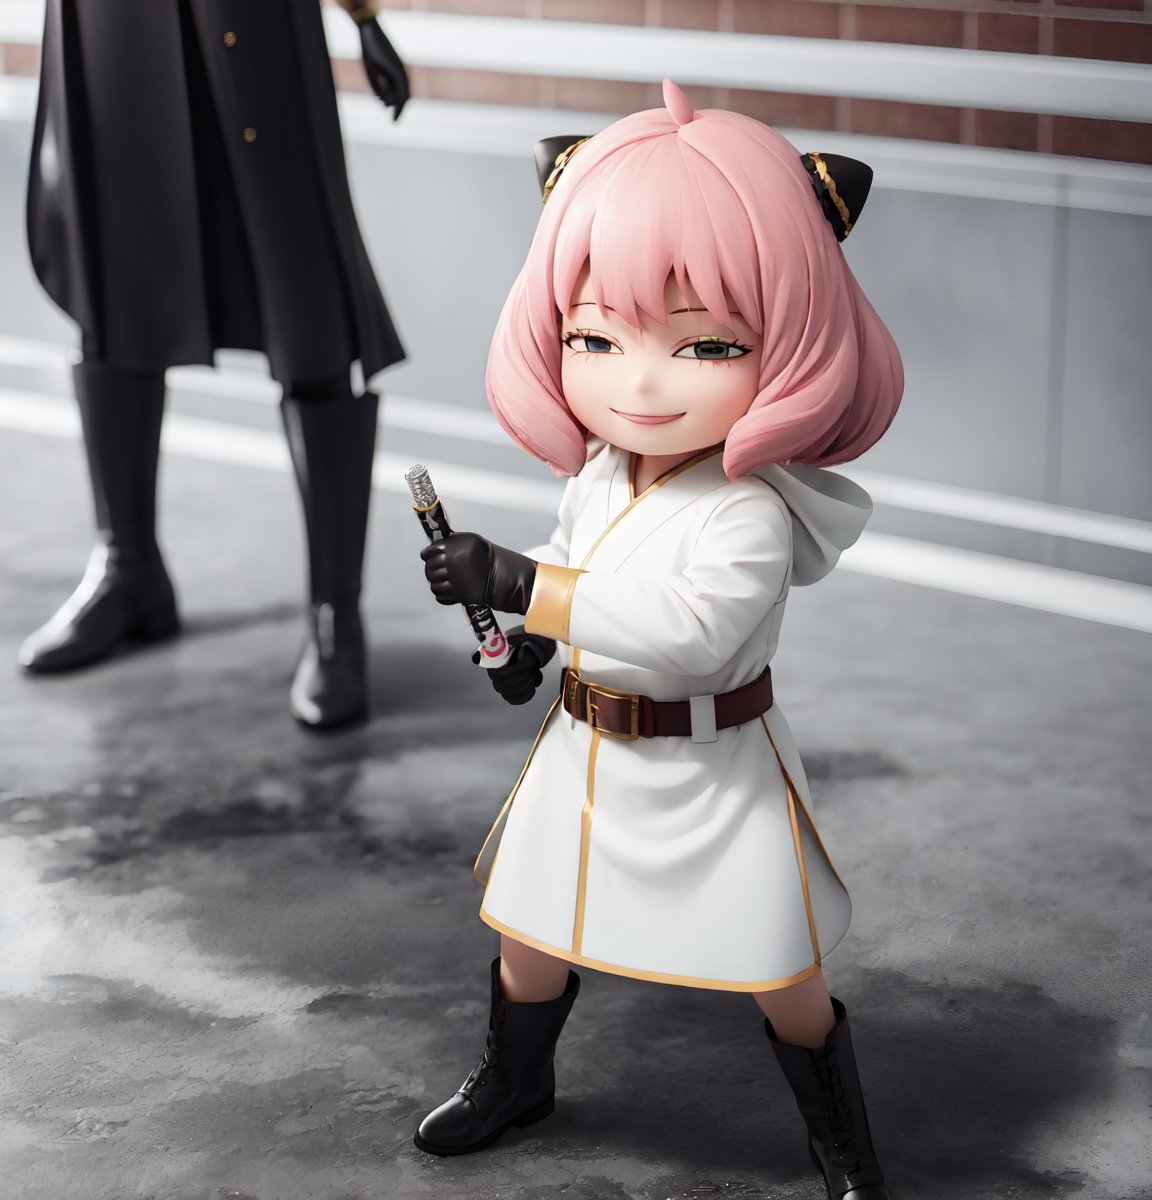 masterpiece, top quality, high resolution, PVC, render, chibi, high resolution, single woman, Anya Forger, pink hair, bob hair,  JediOutfit, robe, belt, boots, single braid, side braid, hood up, vambraces, black gloves, belt, holding Blue lightsaber, fighting stance, brown shirt, greaves, grey eyes, smiling, selfish target, chibi, prohibition era streetscape, smiling, grinning, self-satisfied, full body, chibi, 3d figure, toy, doll, character print, front view, natural light, ((realistic)) 1.2)), dynamic pose, medium movement, perfect cinematic perfect lighting, perfect composition, Anya Forger spy x family, JediStyle,JediOutfit